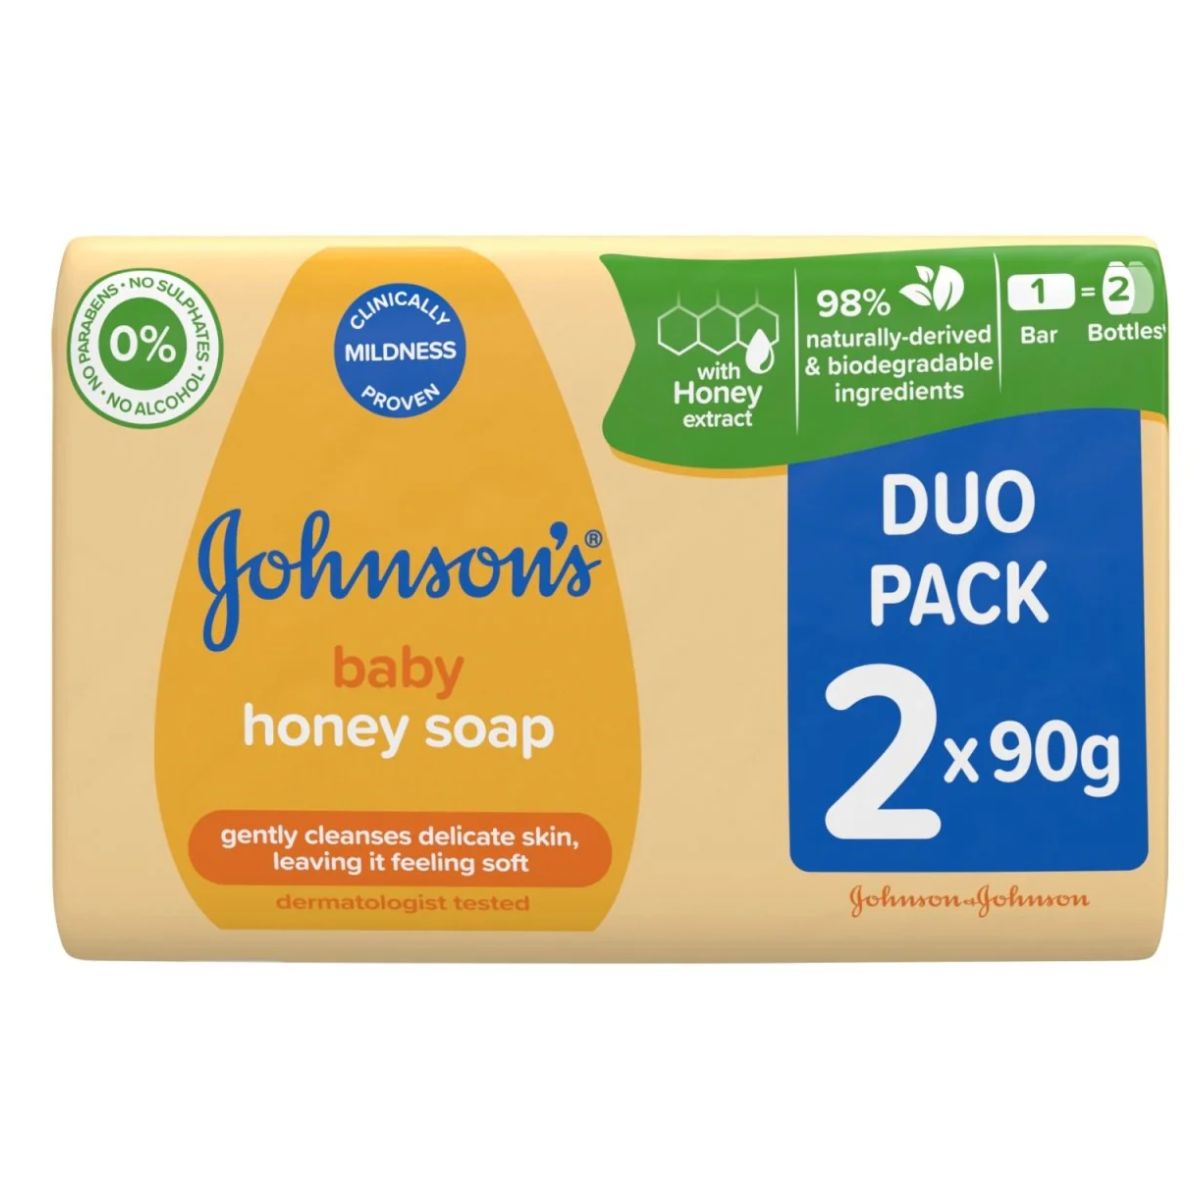 Packaging of Johnsons - Baby Honey Soap - 2pcs duo pack, each bar 90g, highlighting natural ingredients and dermatologist tested.